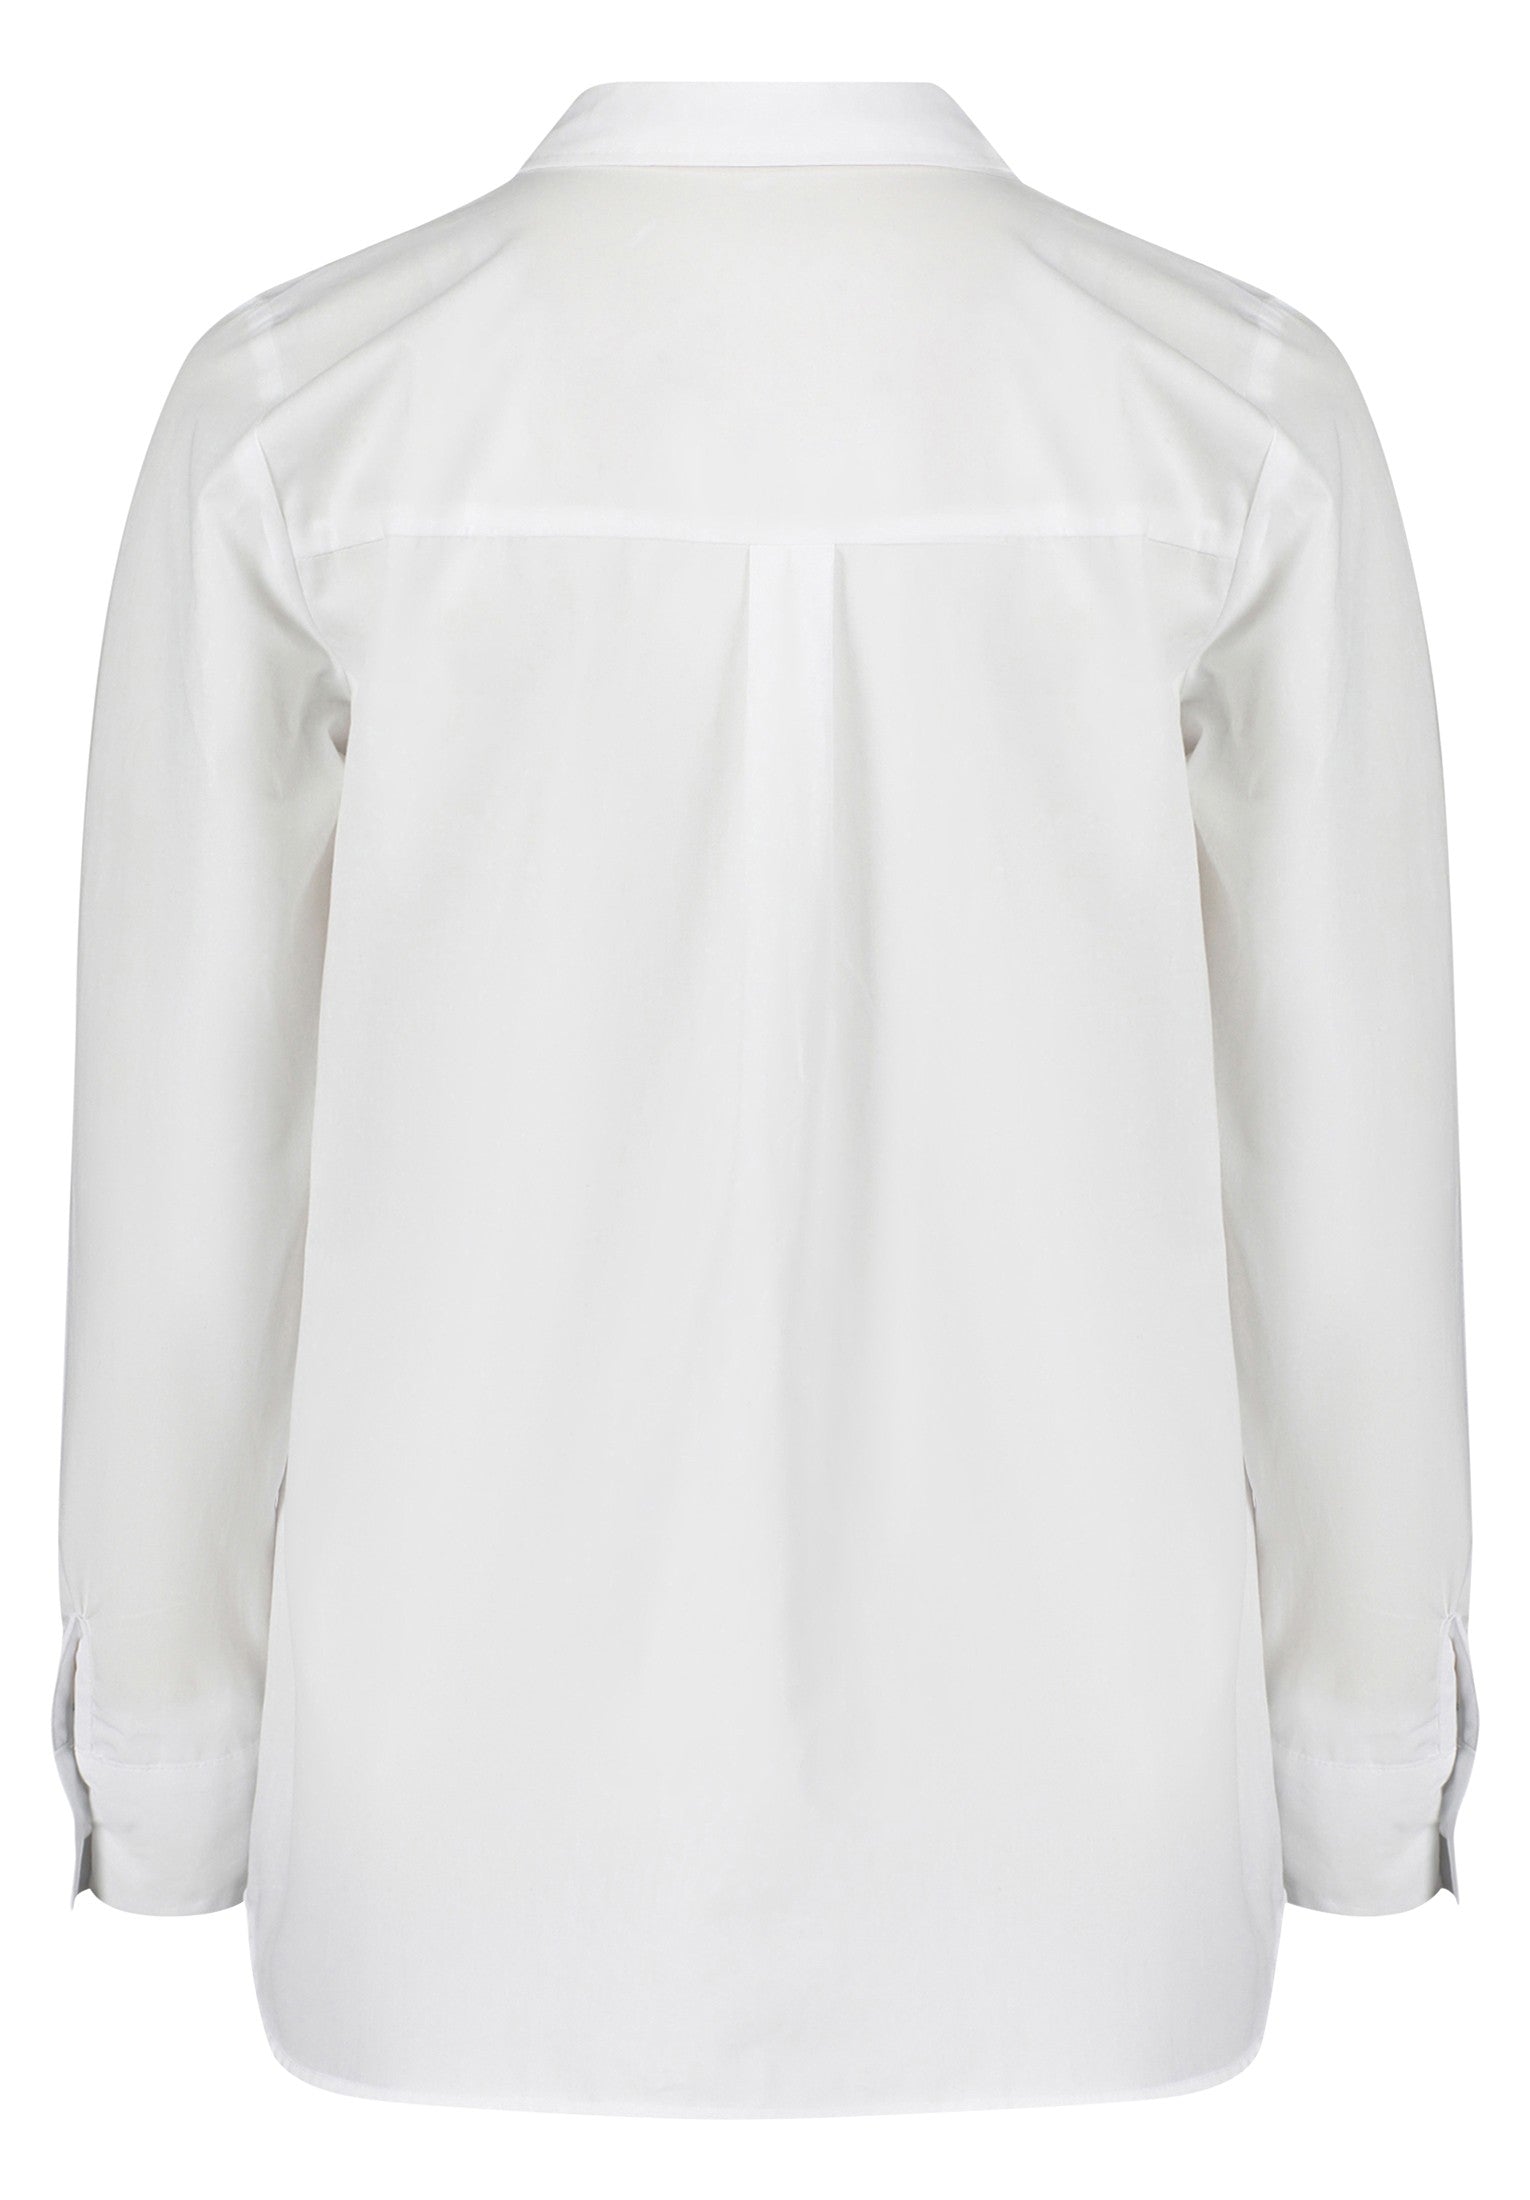 Betty Barclay Casual Fit Shirt White